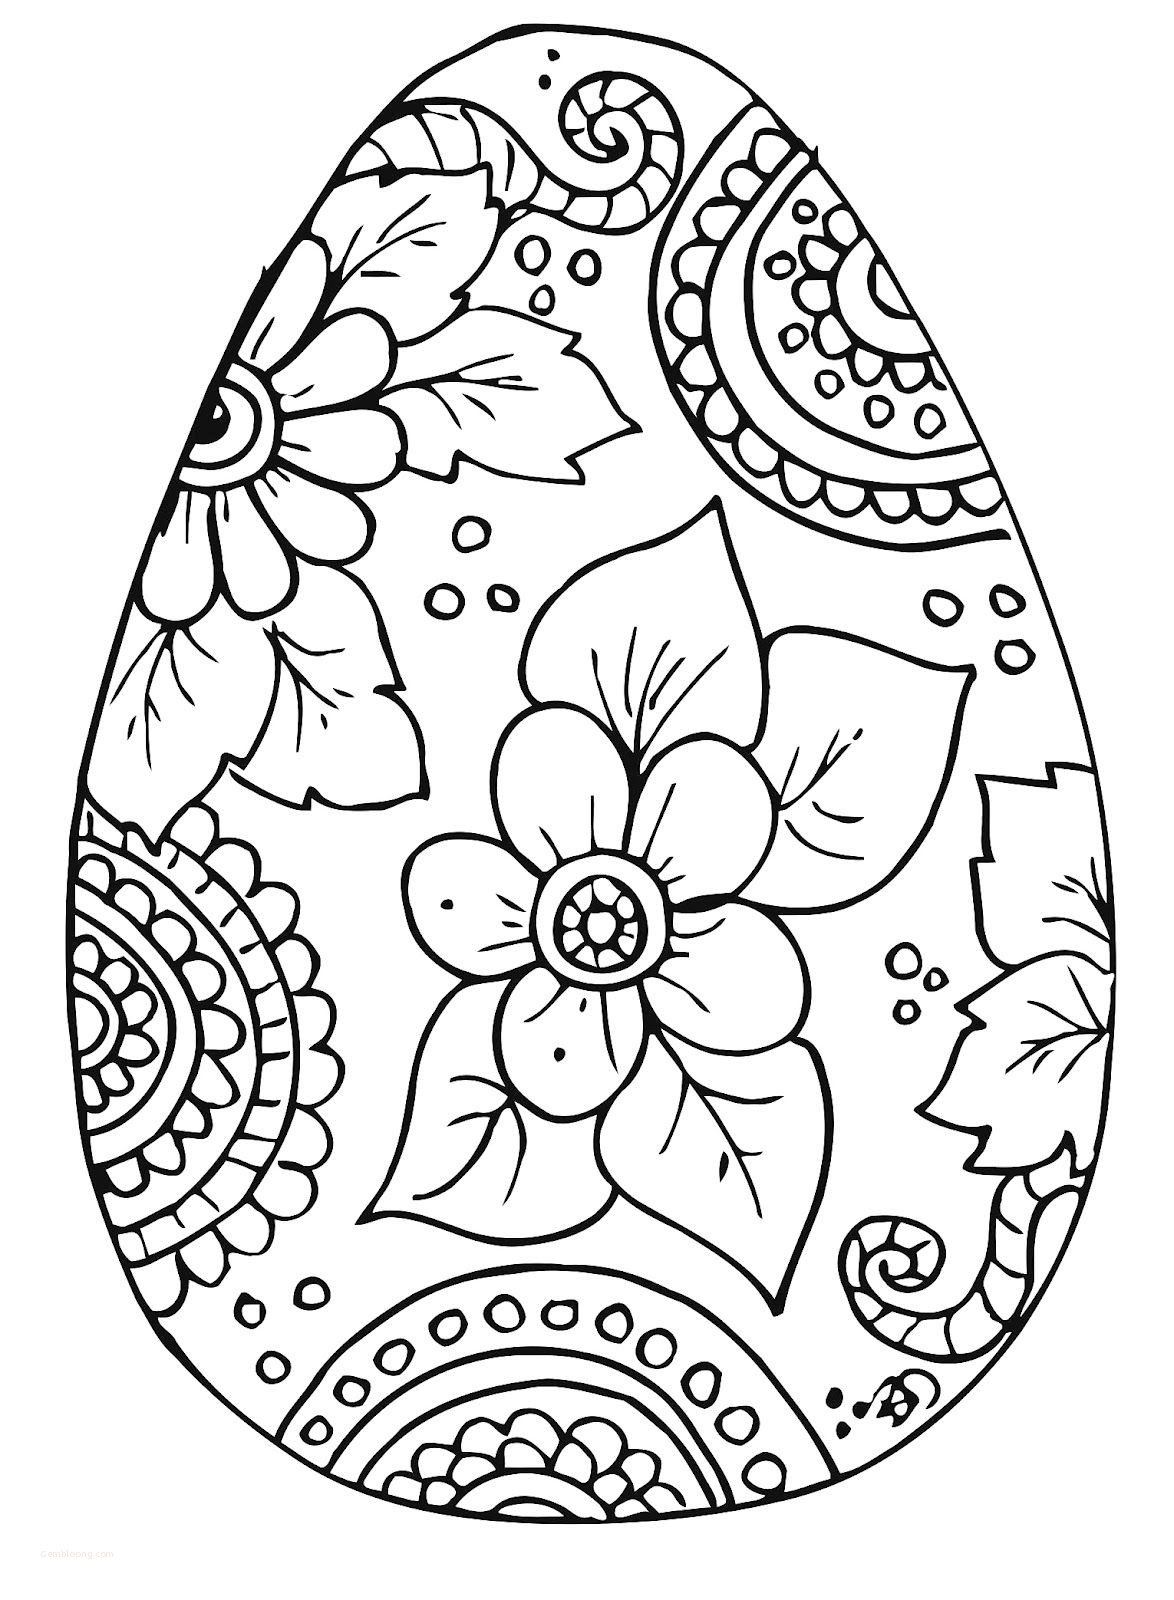 Coloring pages free easter coloring pages to print lovely free easter egg coloring pages of free easter coloring pages to print